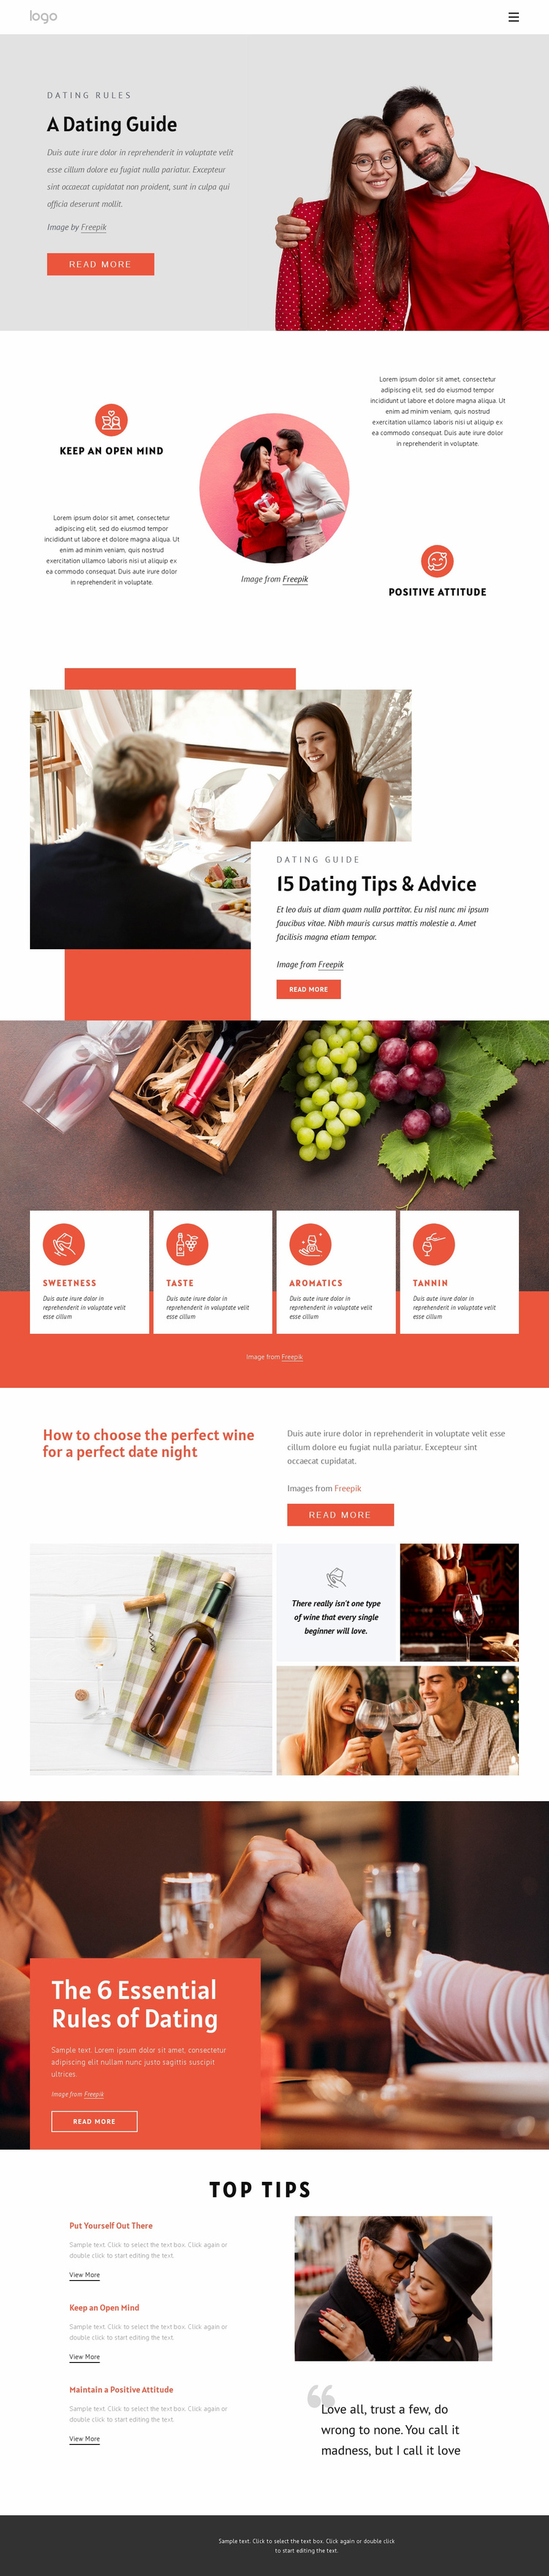 Dating guide Website Template